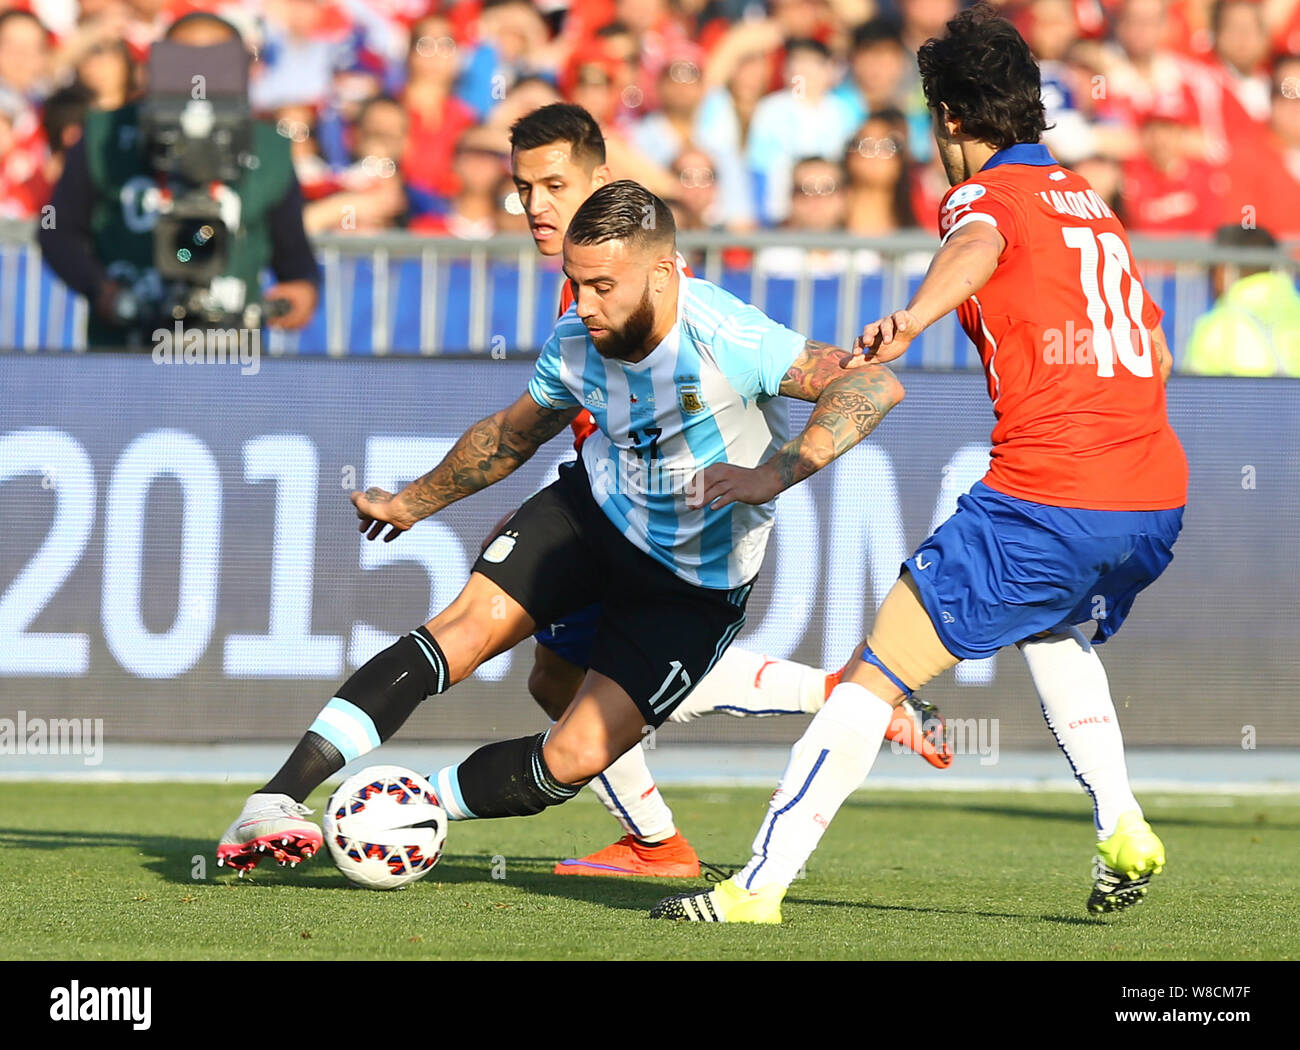 Chile's Jorge Valdivia, right, challenges Argentina's Nicolas Otamendi, left, during the Copa America 2015 final soccer match between Chile and Argent Stock Photo